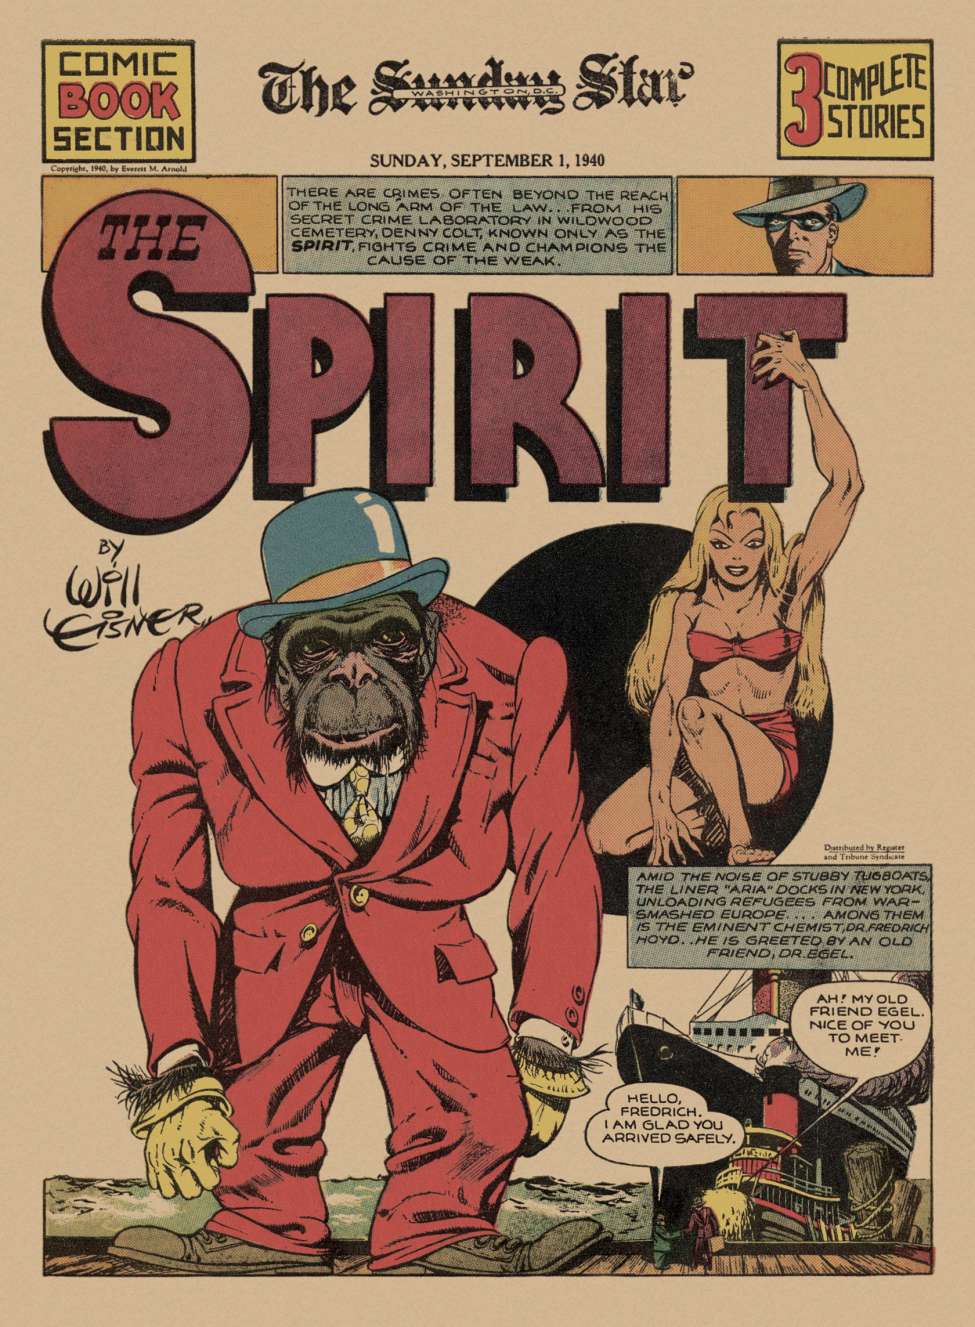 Comic Book Cover For The Spirit (1940-09-01) - Sunday Star